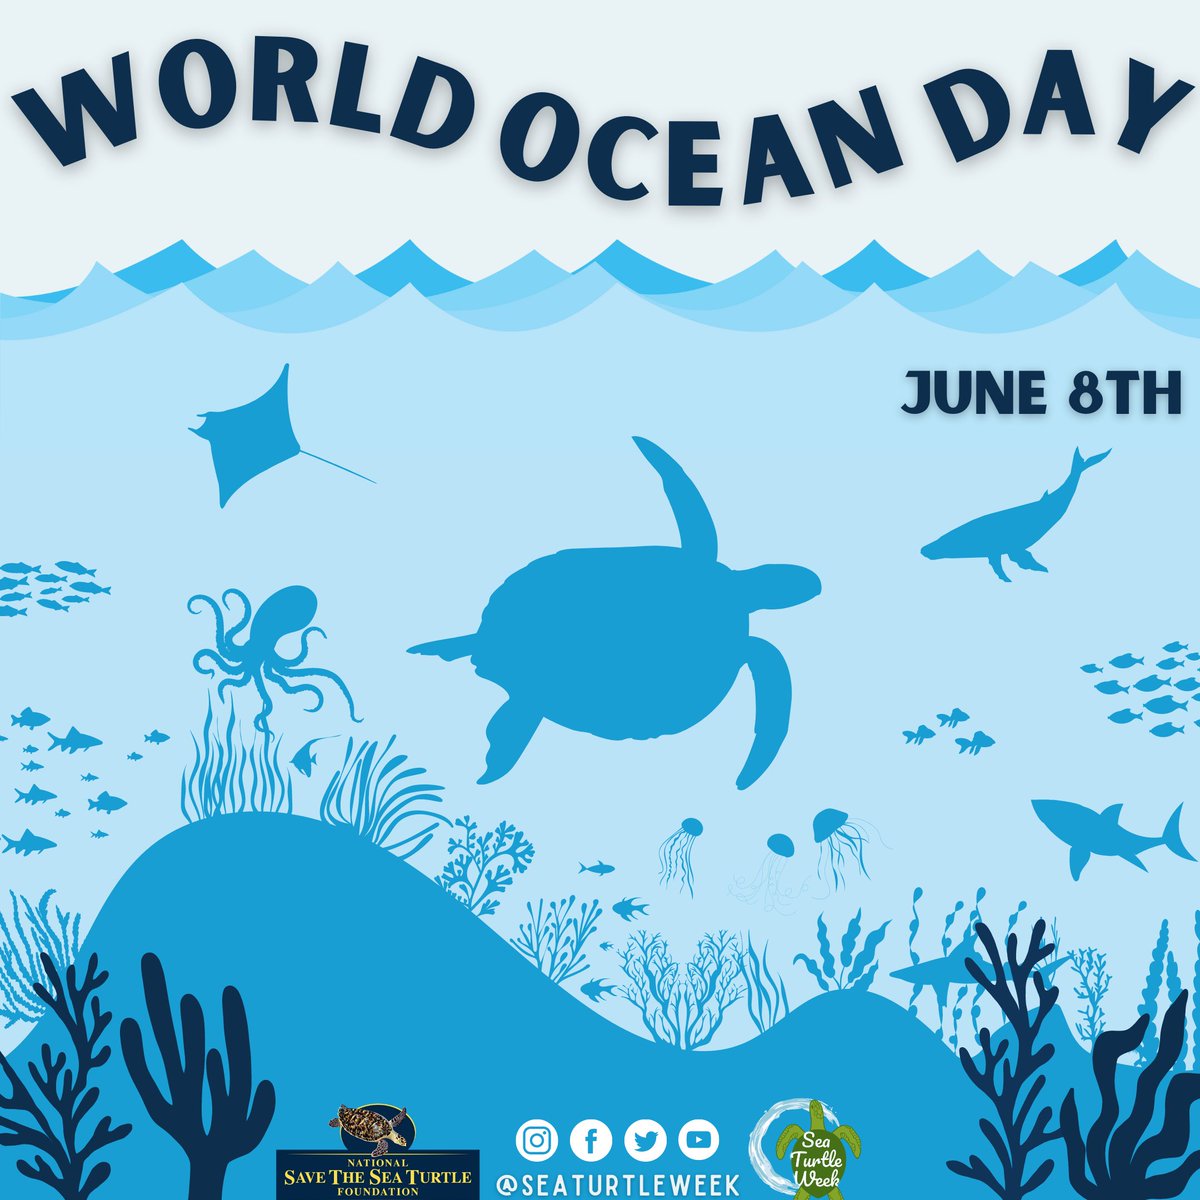 Happy World Ocean Day! 💙🌎🌊✨ Today kicks off #SeaTurtleWeek which is our favorite week of the year!

🌏 Learn more about World Ocean Day here:
worldoceanday.org
seaturtleweek.com/world-oceans-d…

#WorldOceanDay #Protect30x30 #OceanClimateAction #seaturtleweek